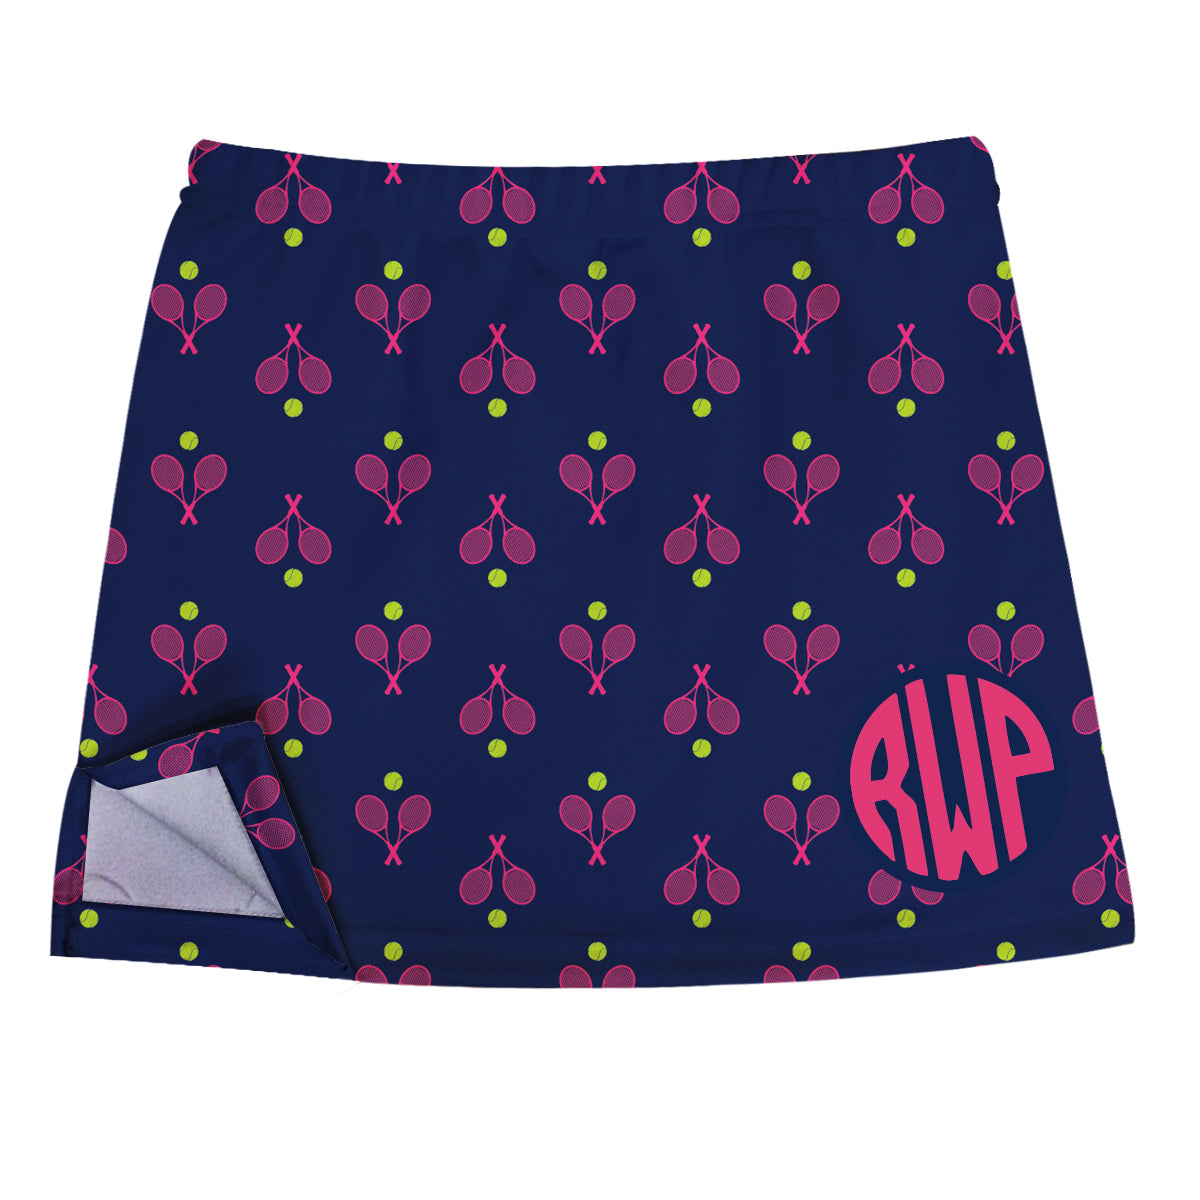 Tennis Print Personalized Monogram Navy Skort With Side Vents